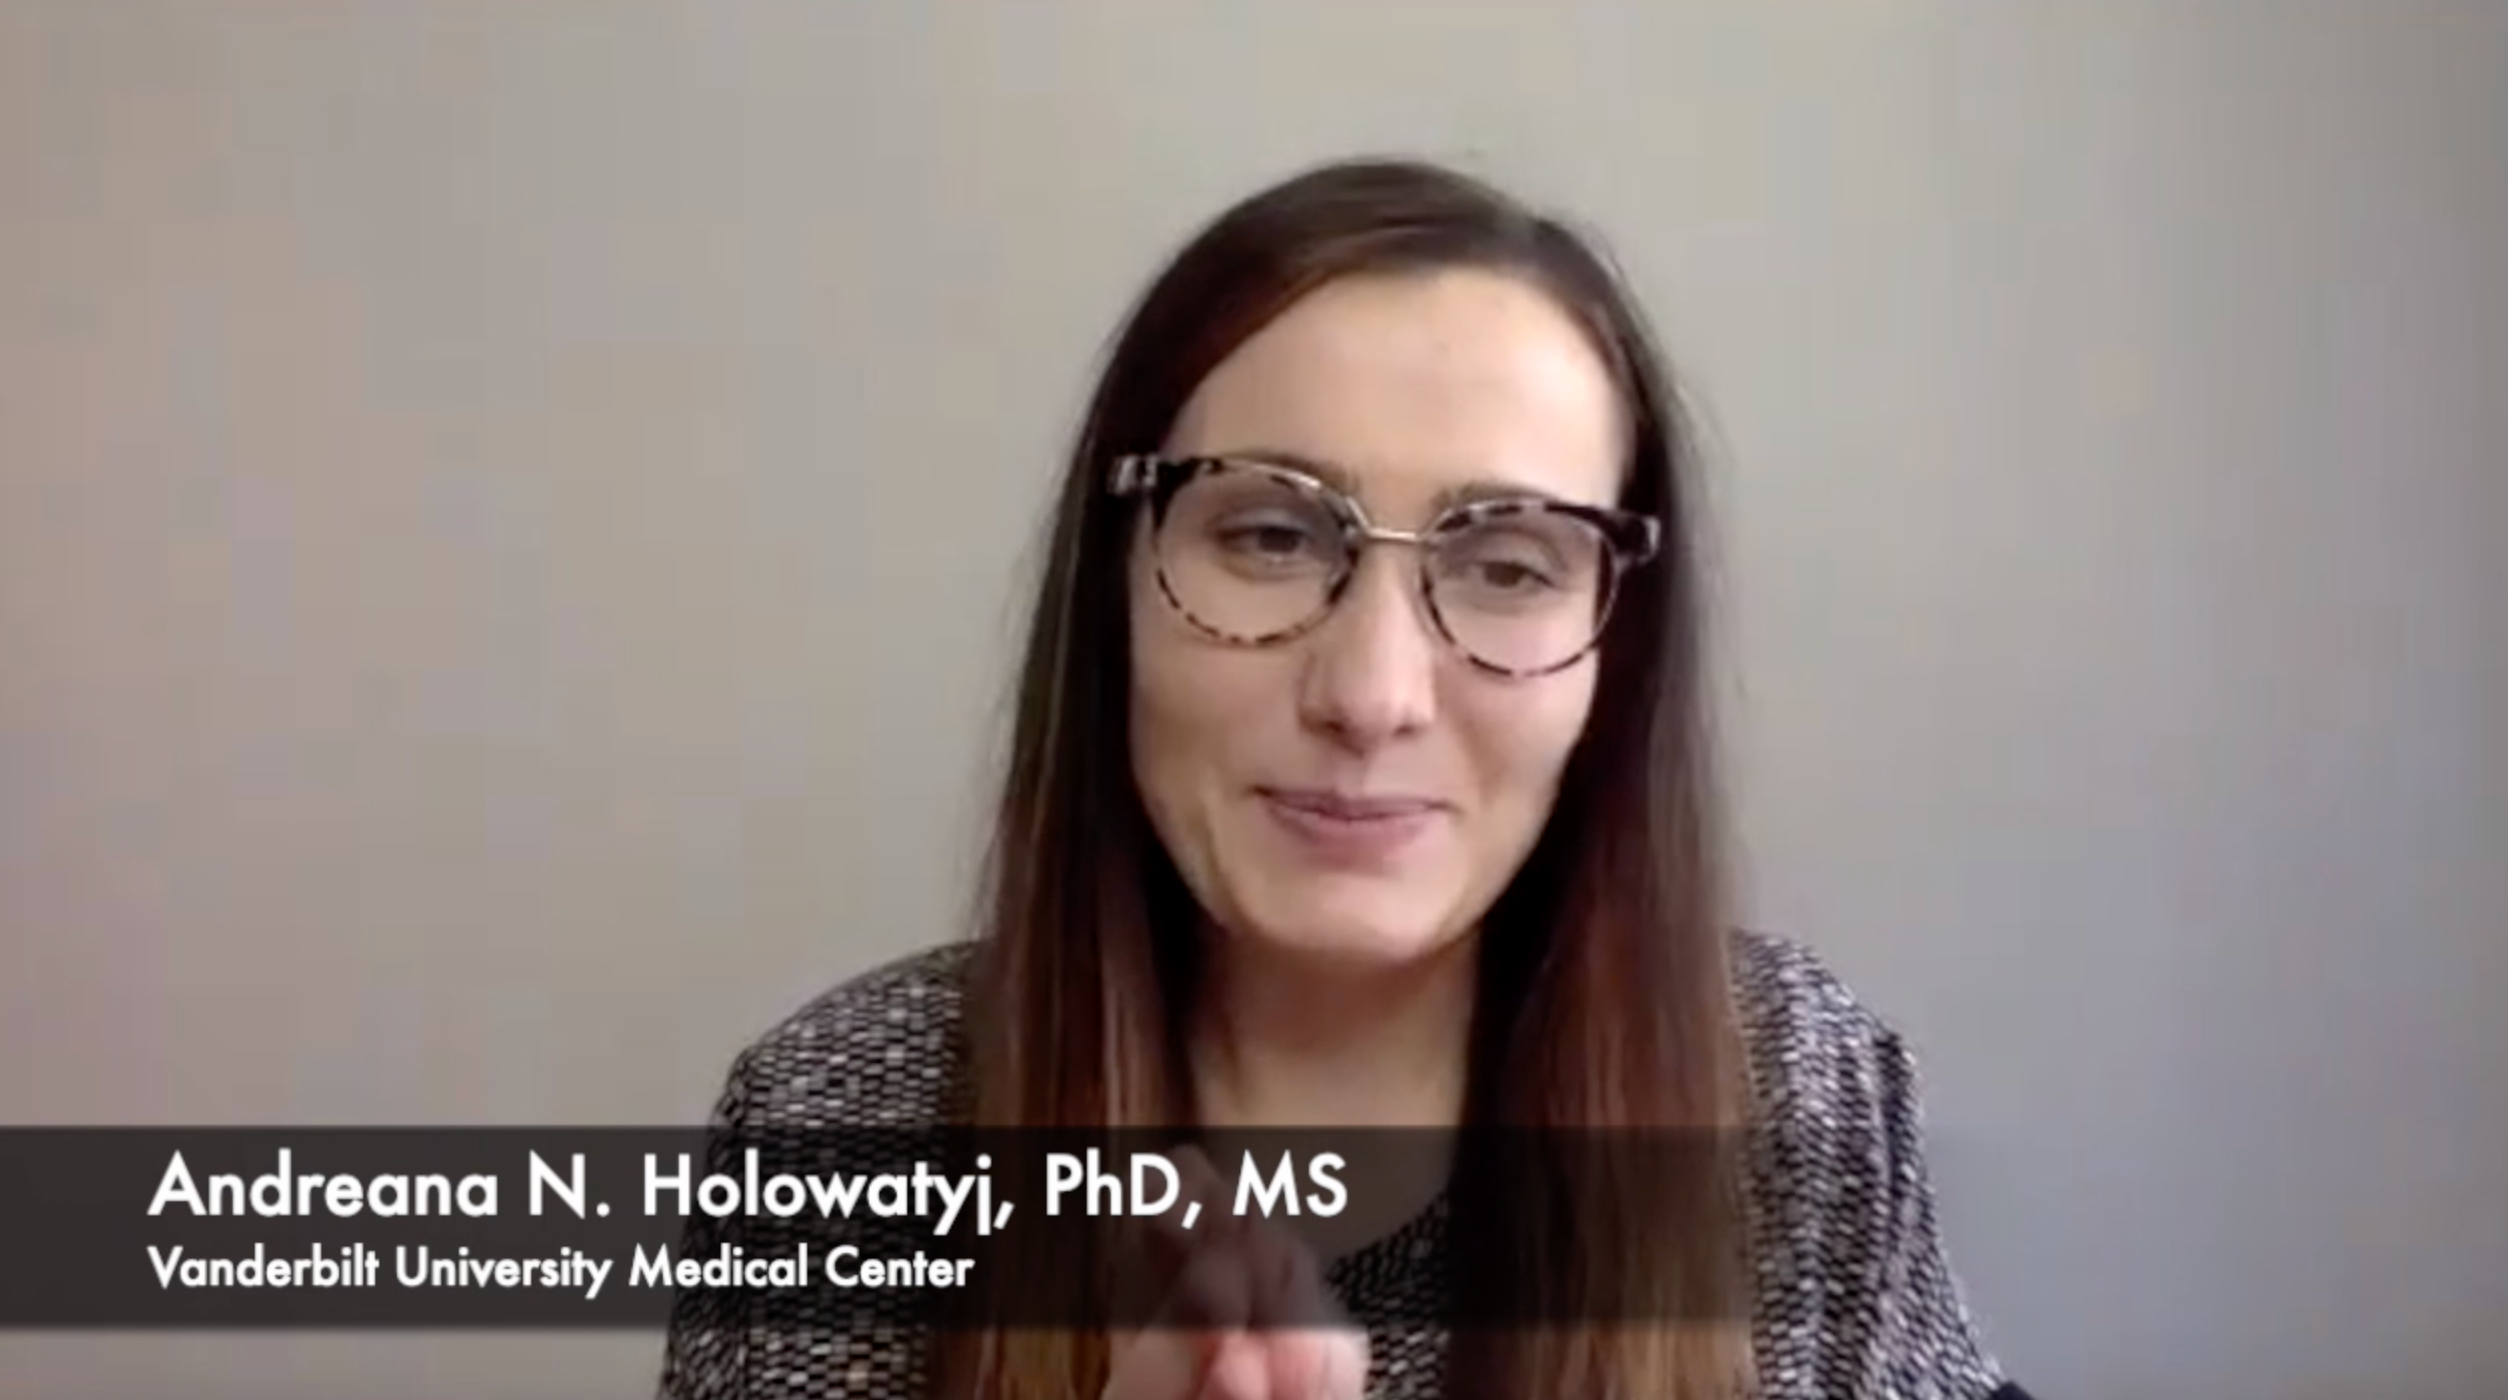 Andreana N. Holowatyj, PhD, MS, Emphasizes the Complexity of Her Research in Colorectal Cancer and Future Opportunities